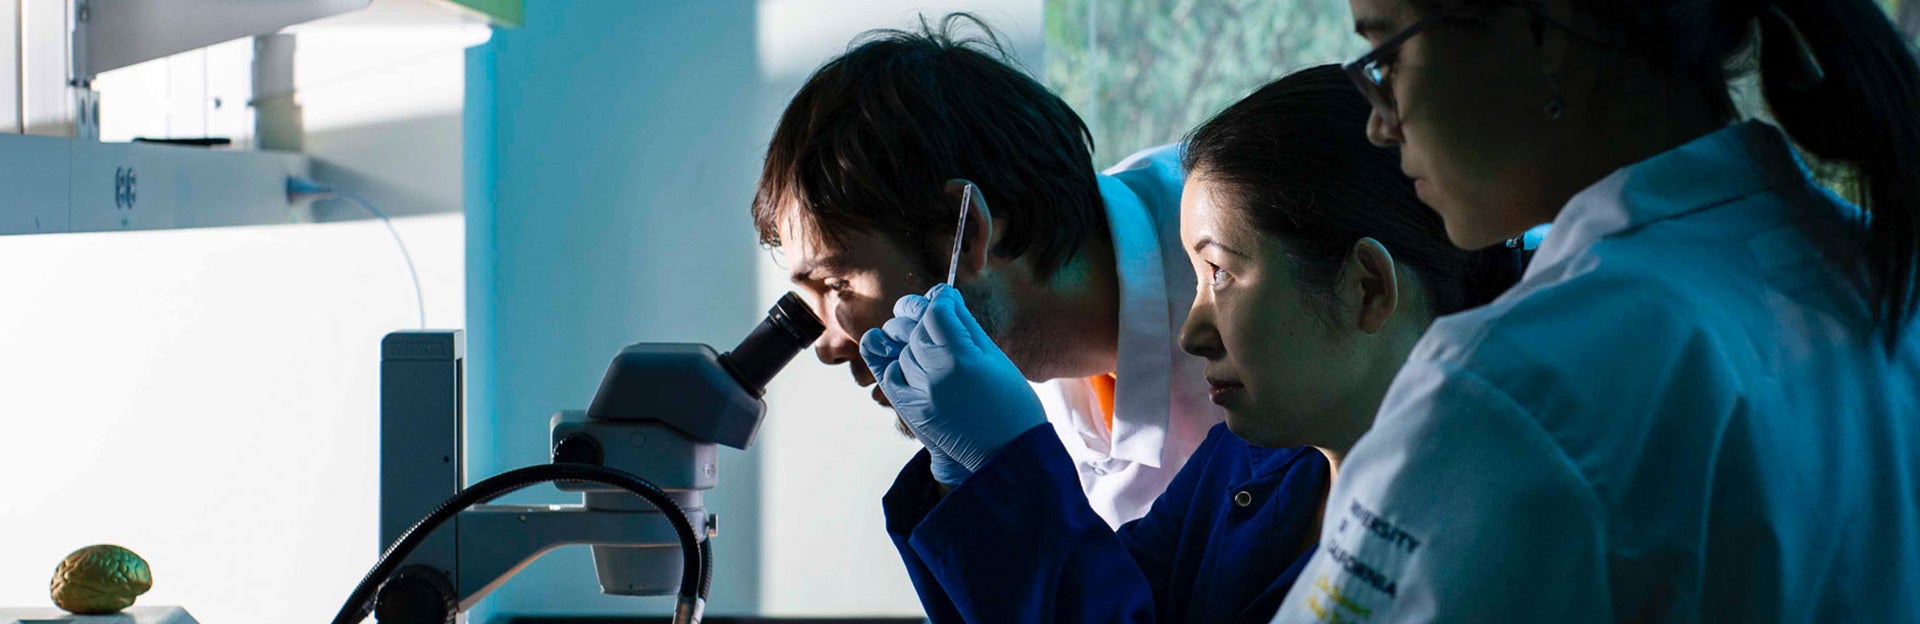 Students in Lab - iStock